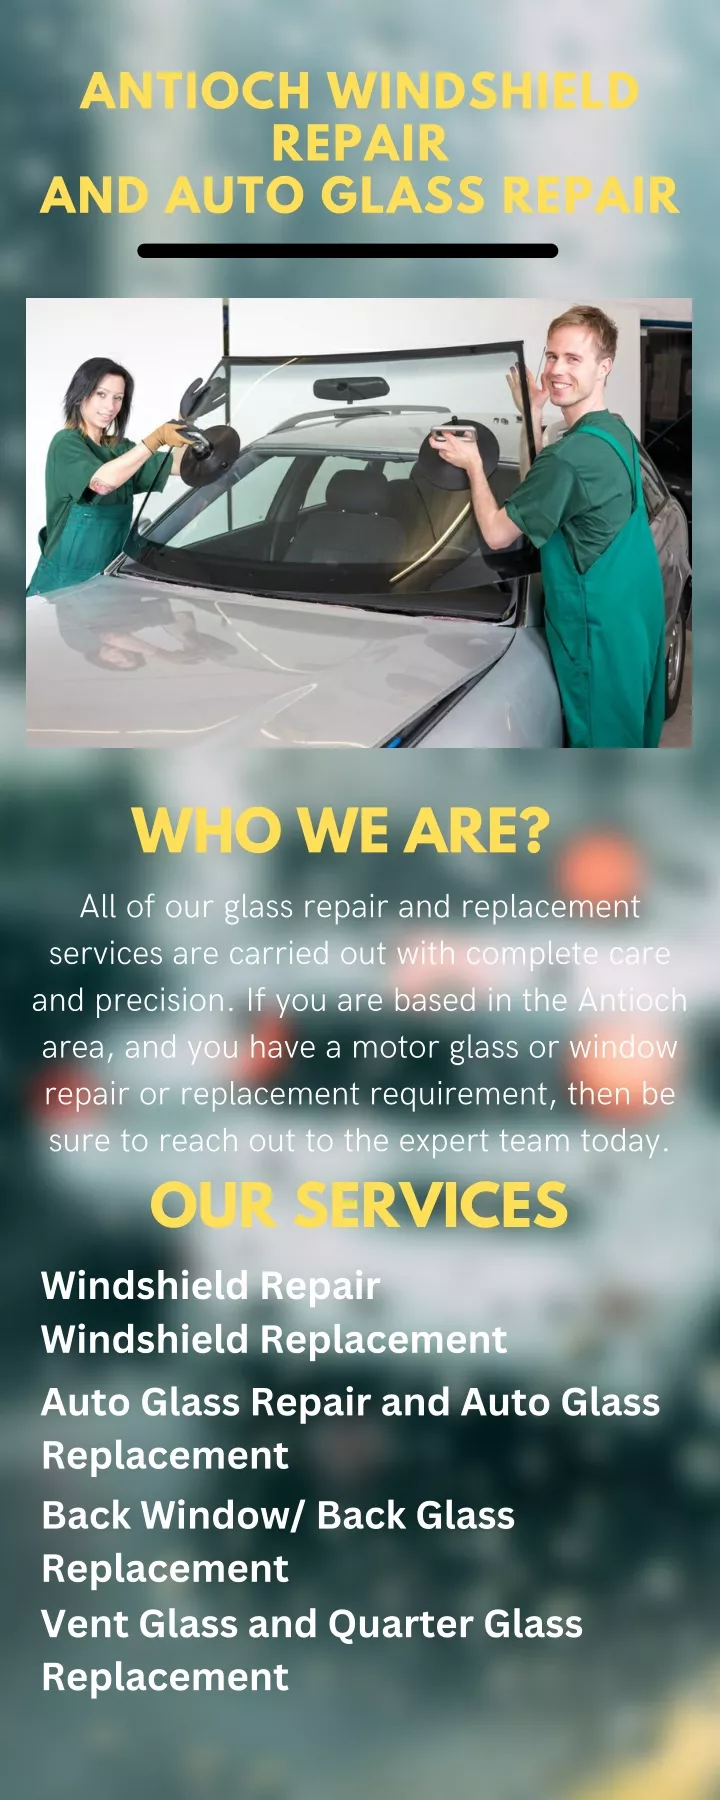 antioch windshield repair and auto glass repair